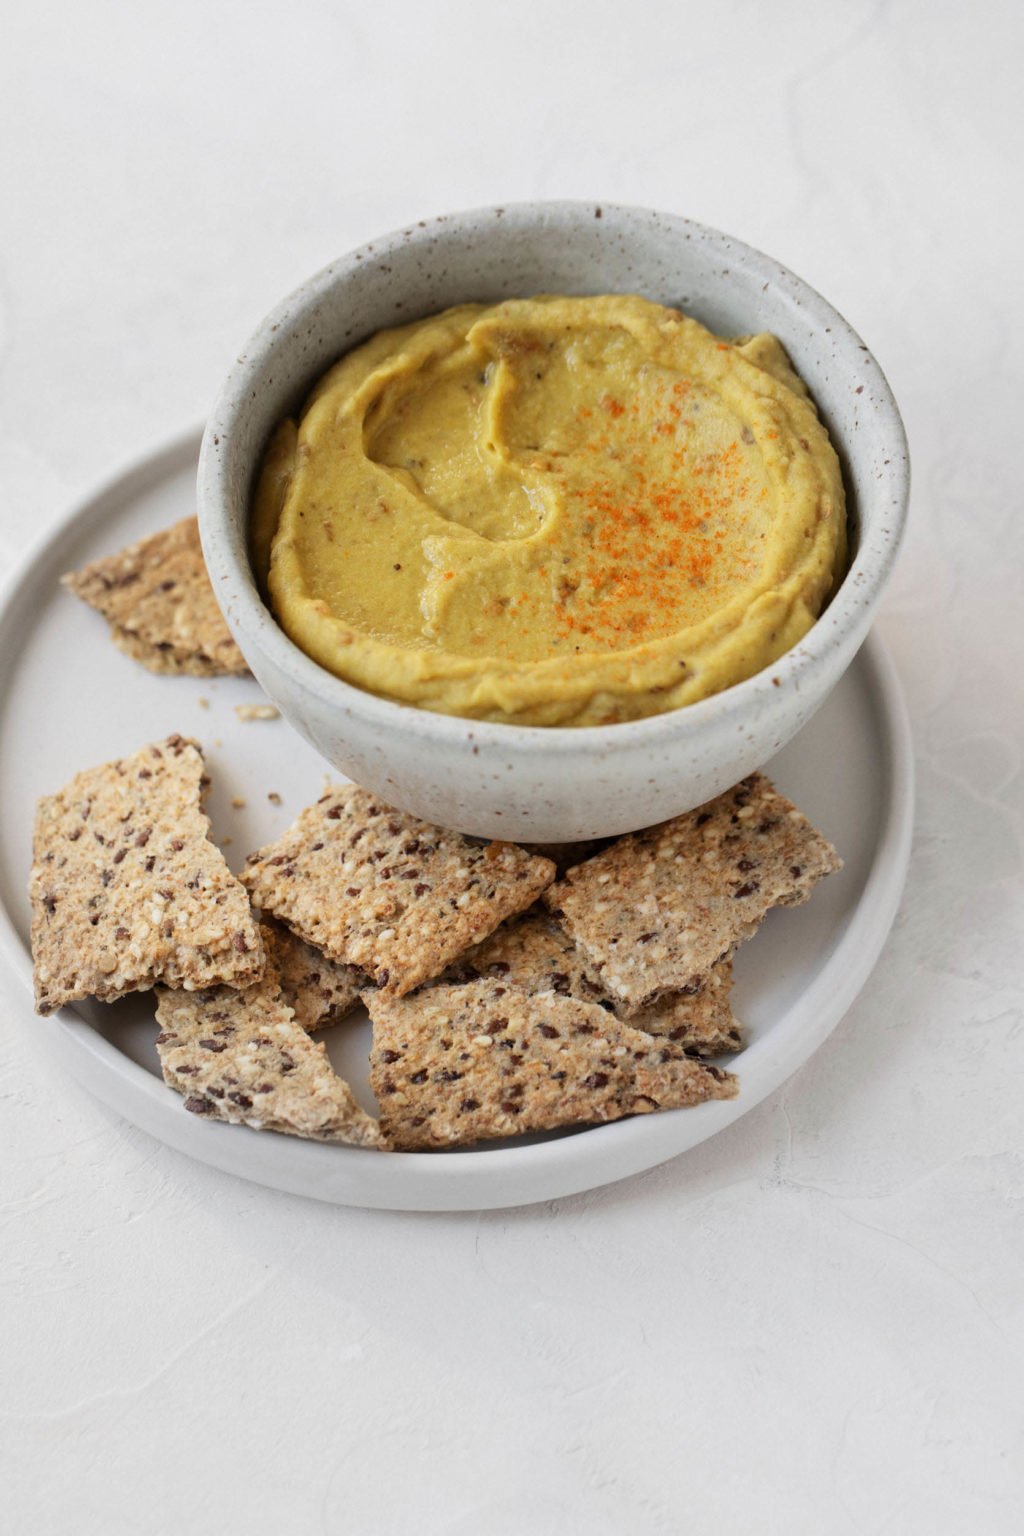 A small white dip bowl contains a light orange dip. It's paired with seedy crackers.